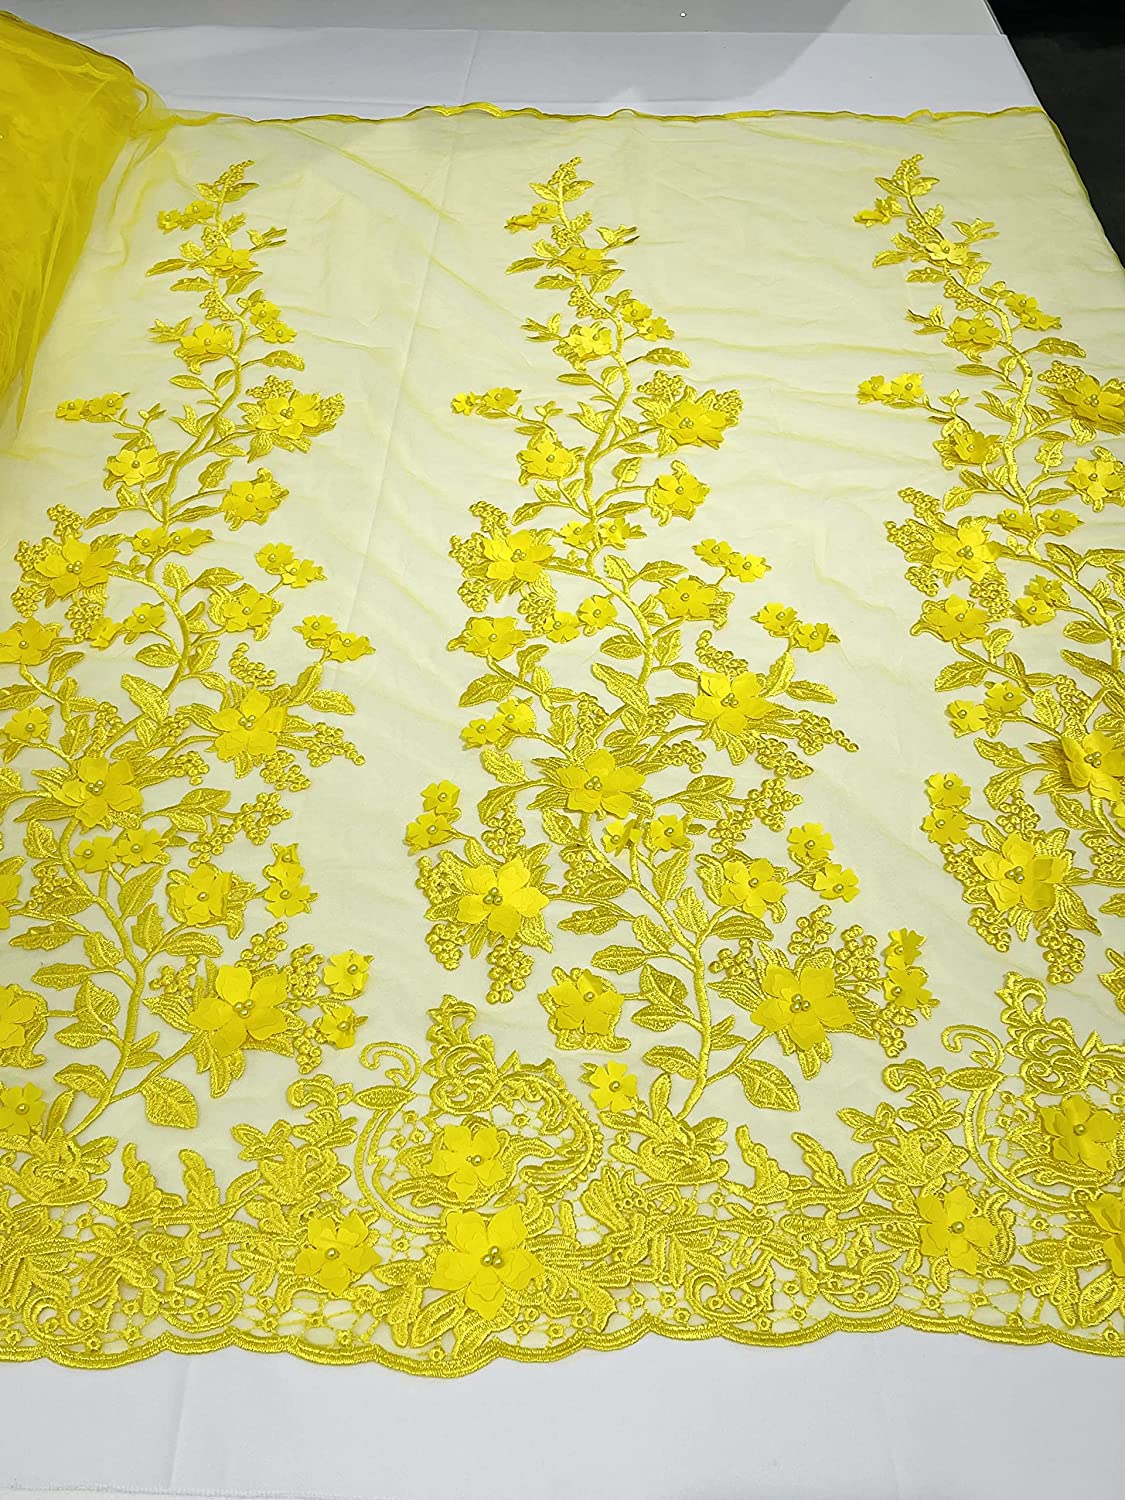 Emily 3-D Floral Design Embroider with Pearls On A Mesh Lace Fabric (1 Yard, Bright Yellow)